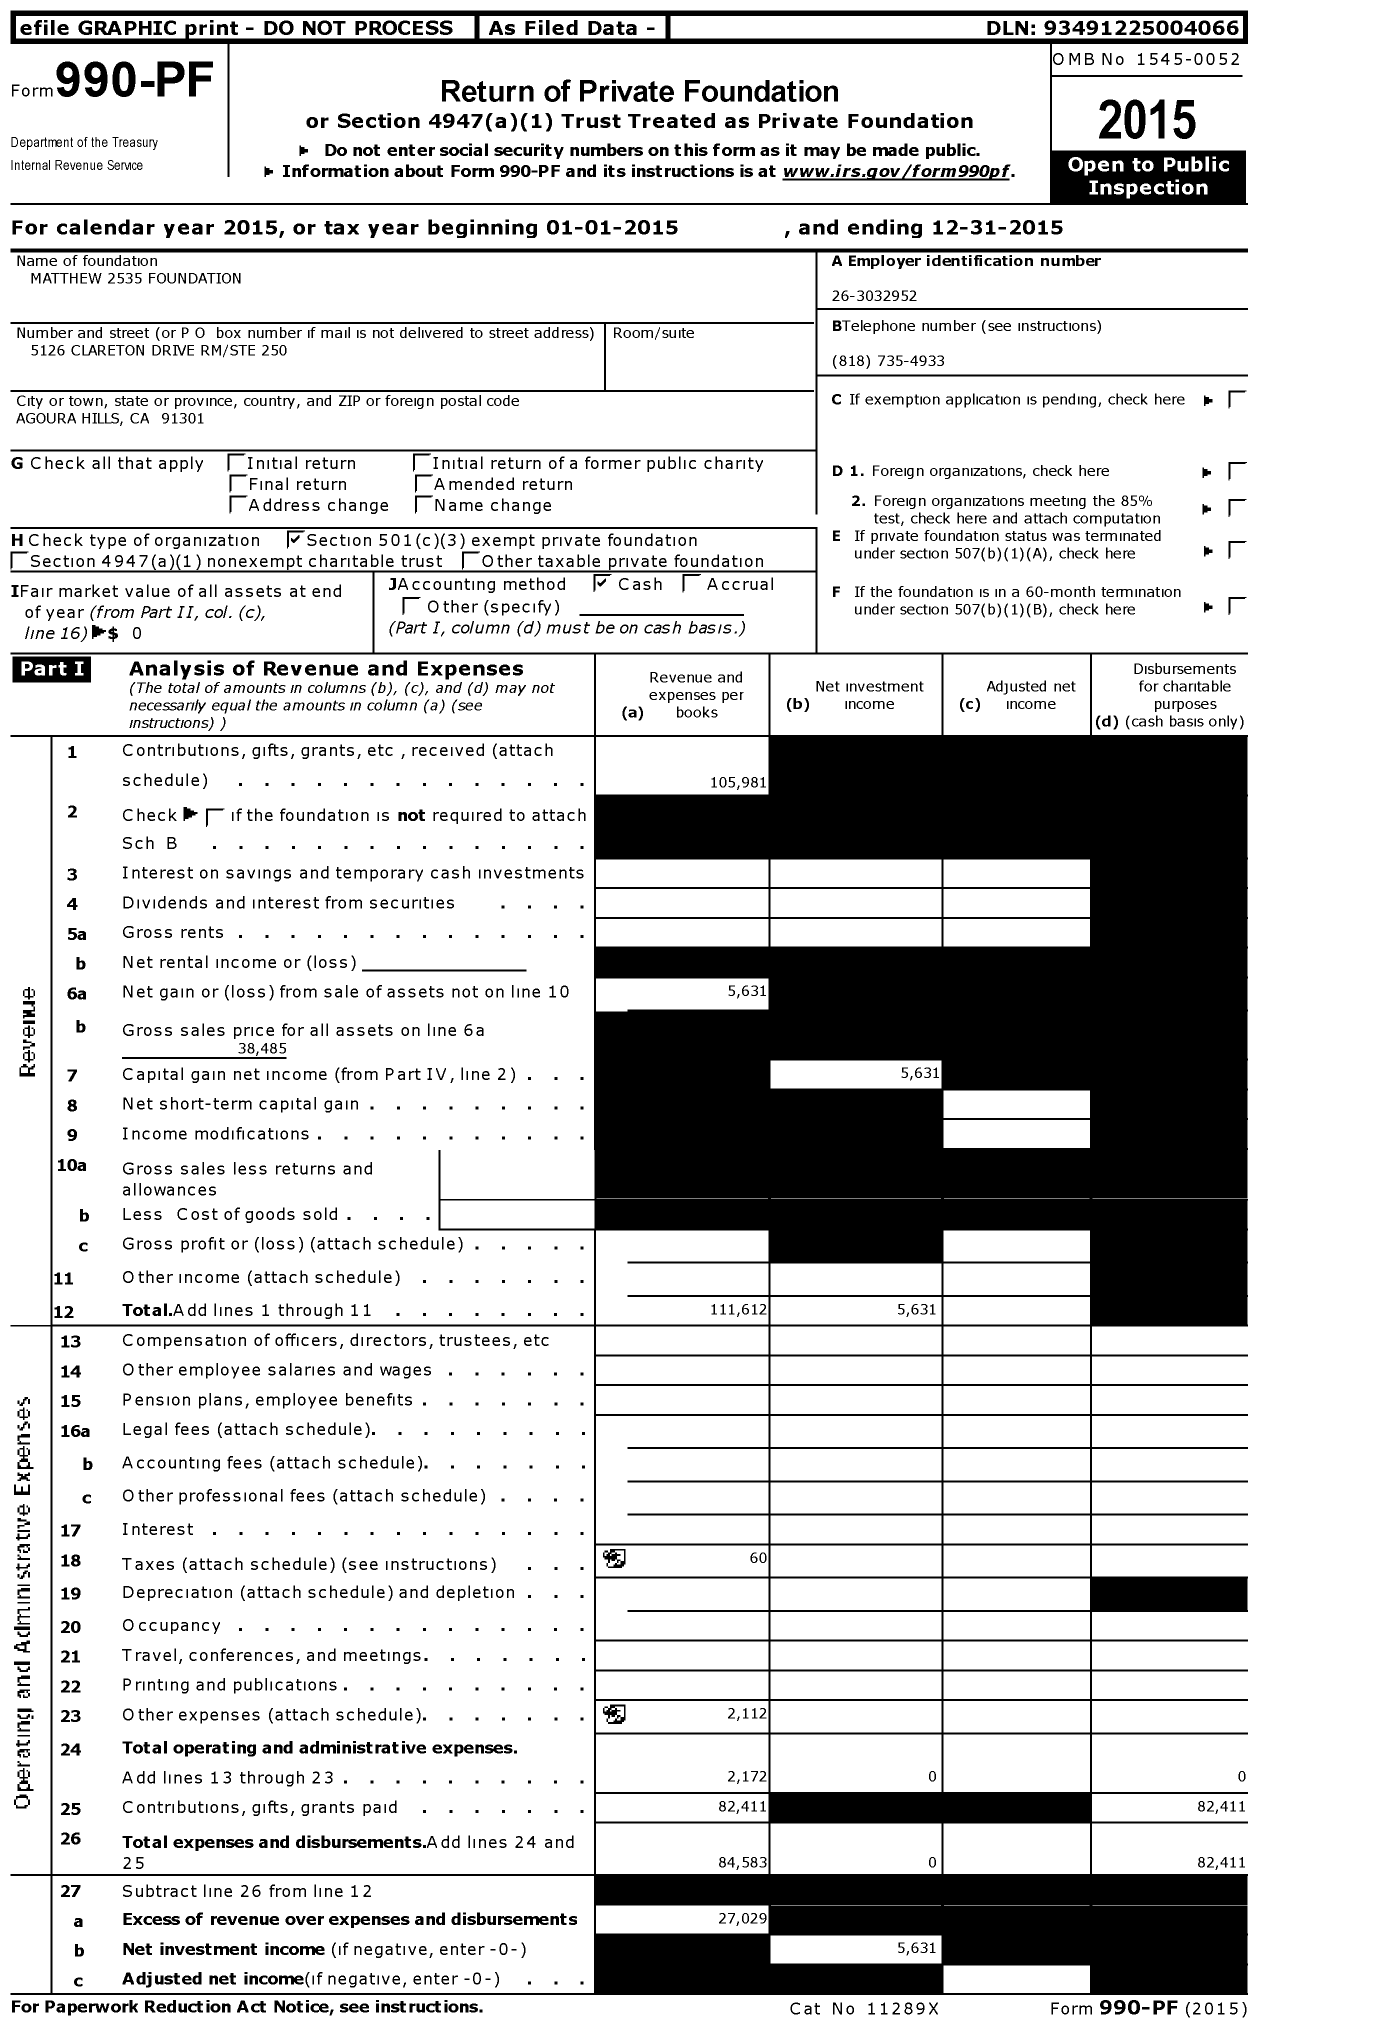 Image of first page of 2015 Form 990PF for Matthew 2535 Foundation